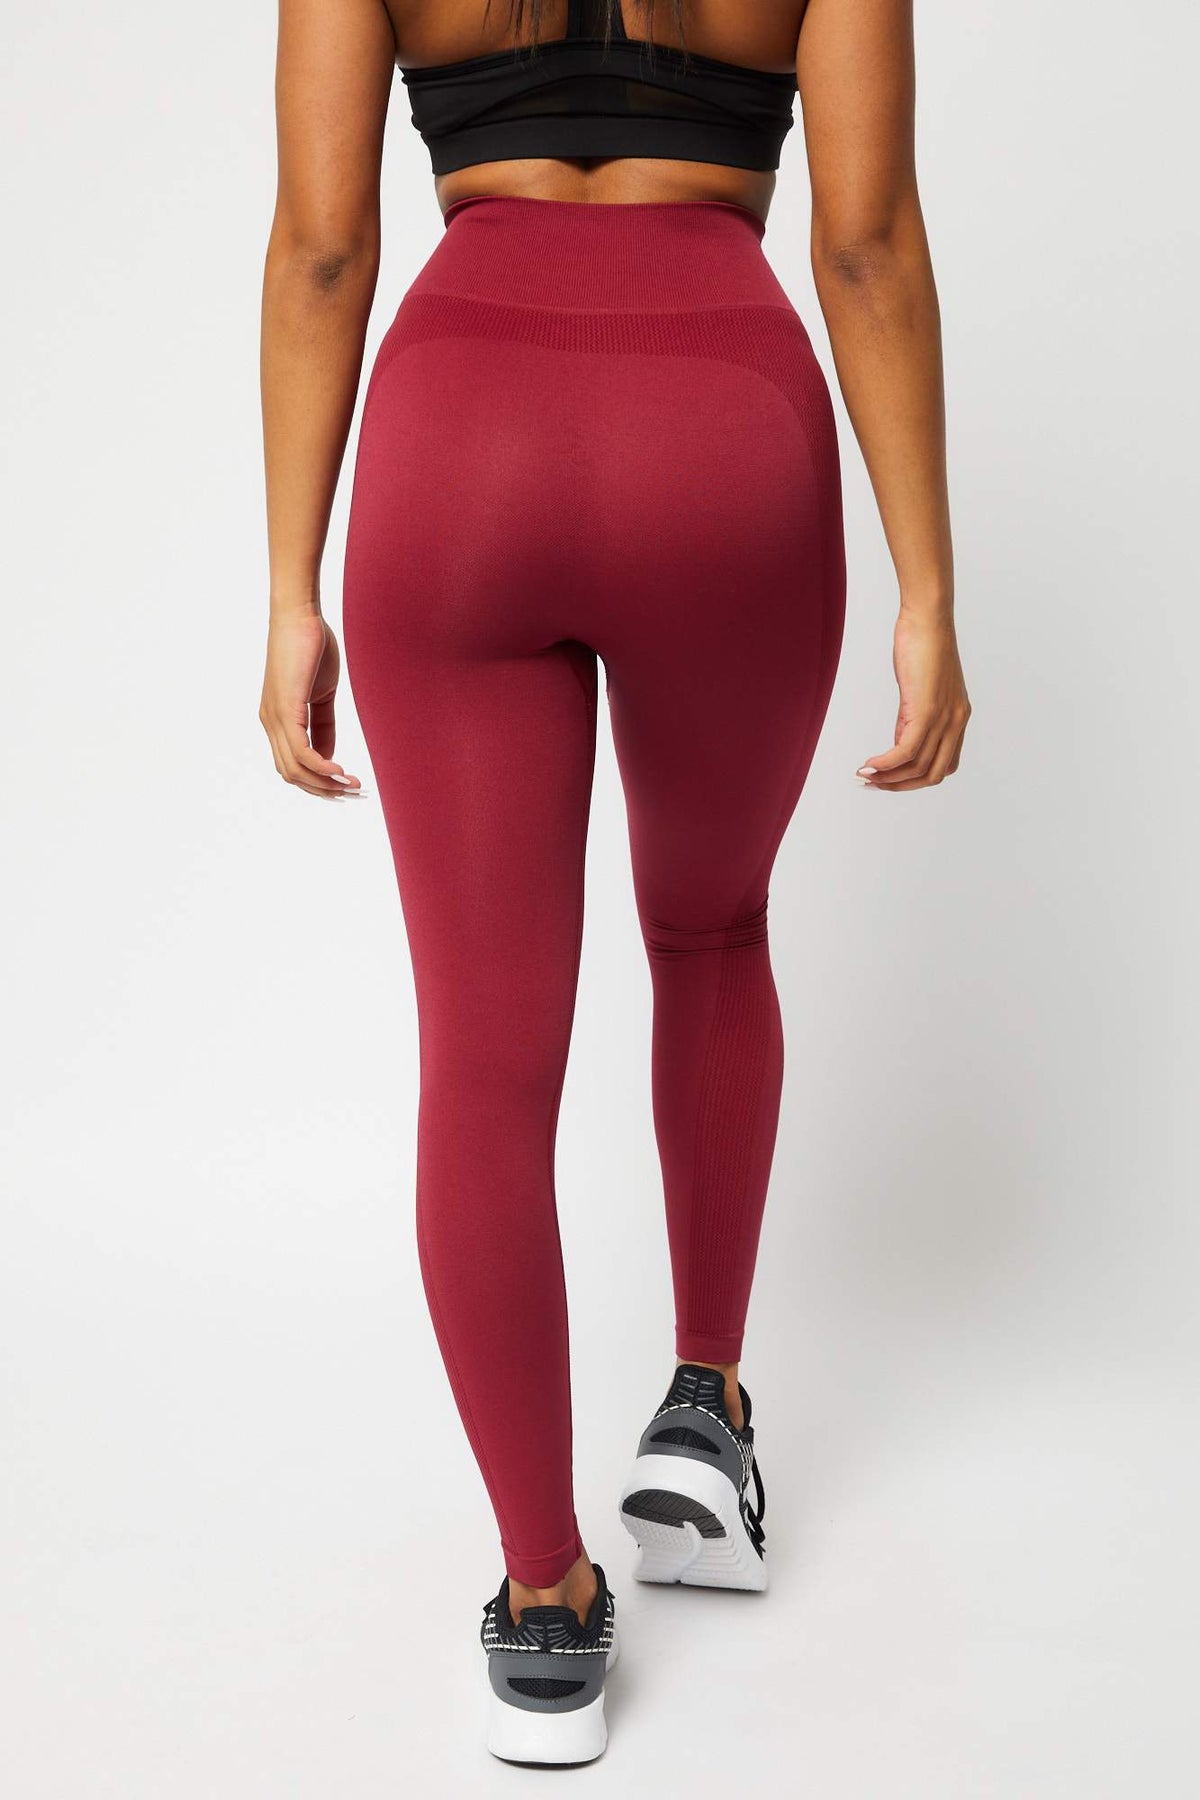 Nuls Anti Roll Edge Waist High Waisted Nudy Feeling Fitness Leggings -  China Yoga and Tight price